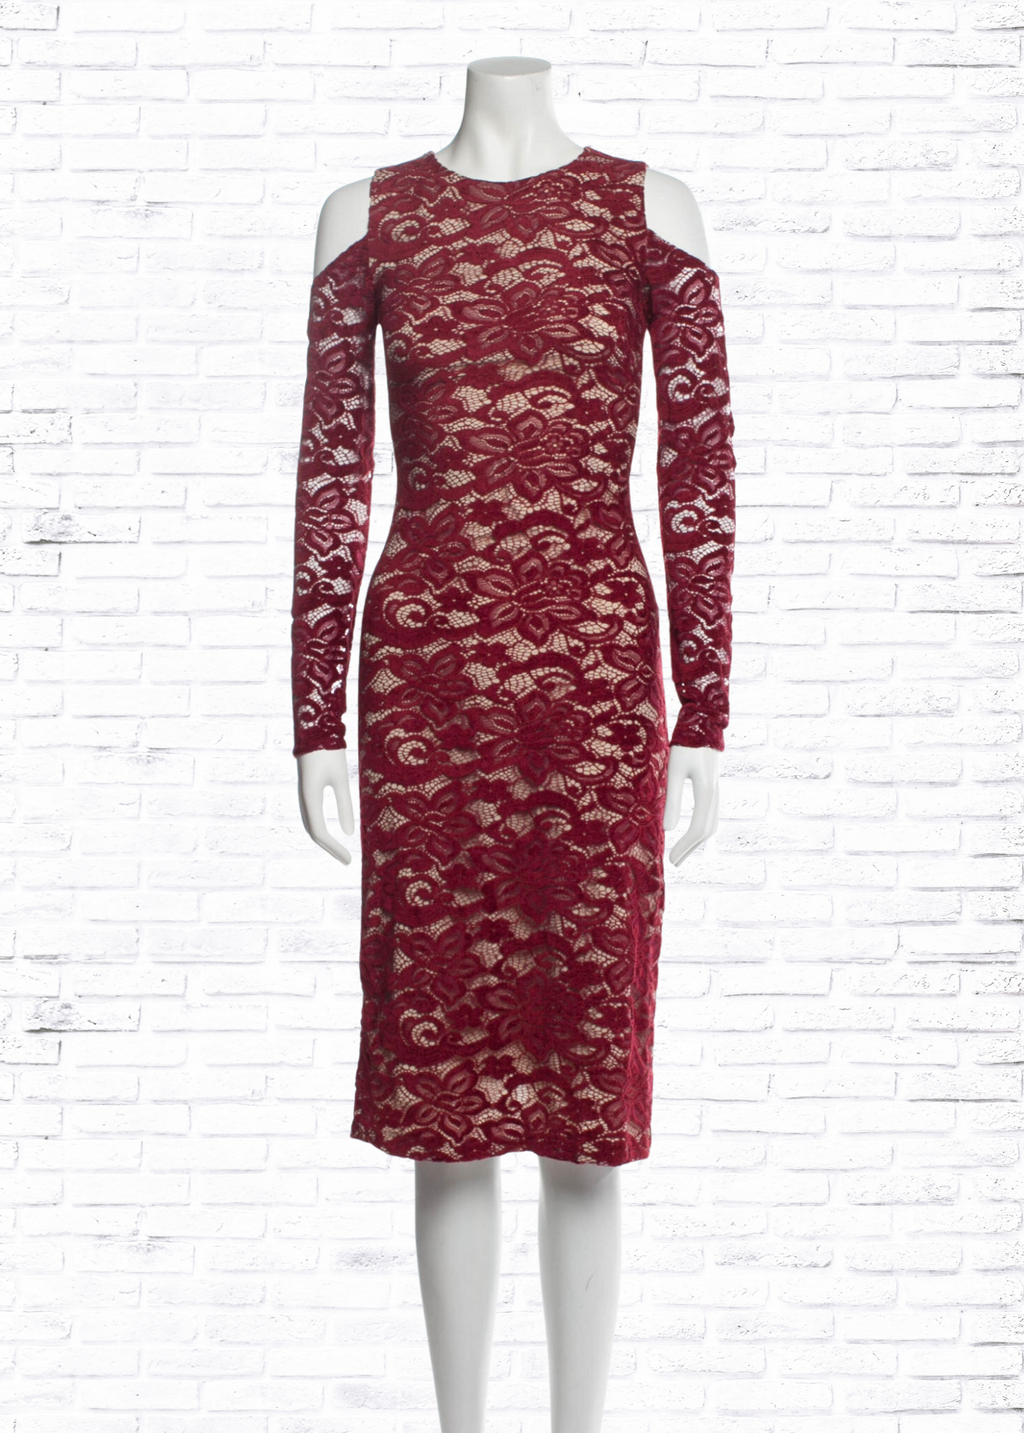 Alice + Olivia Maroon Lace Long Sleeve Dress with Shoulder Cutouts